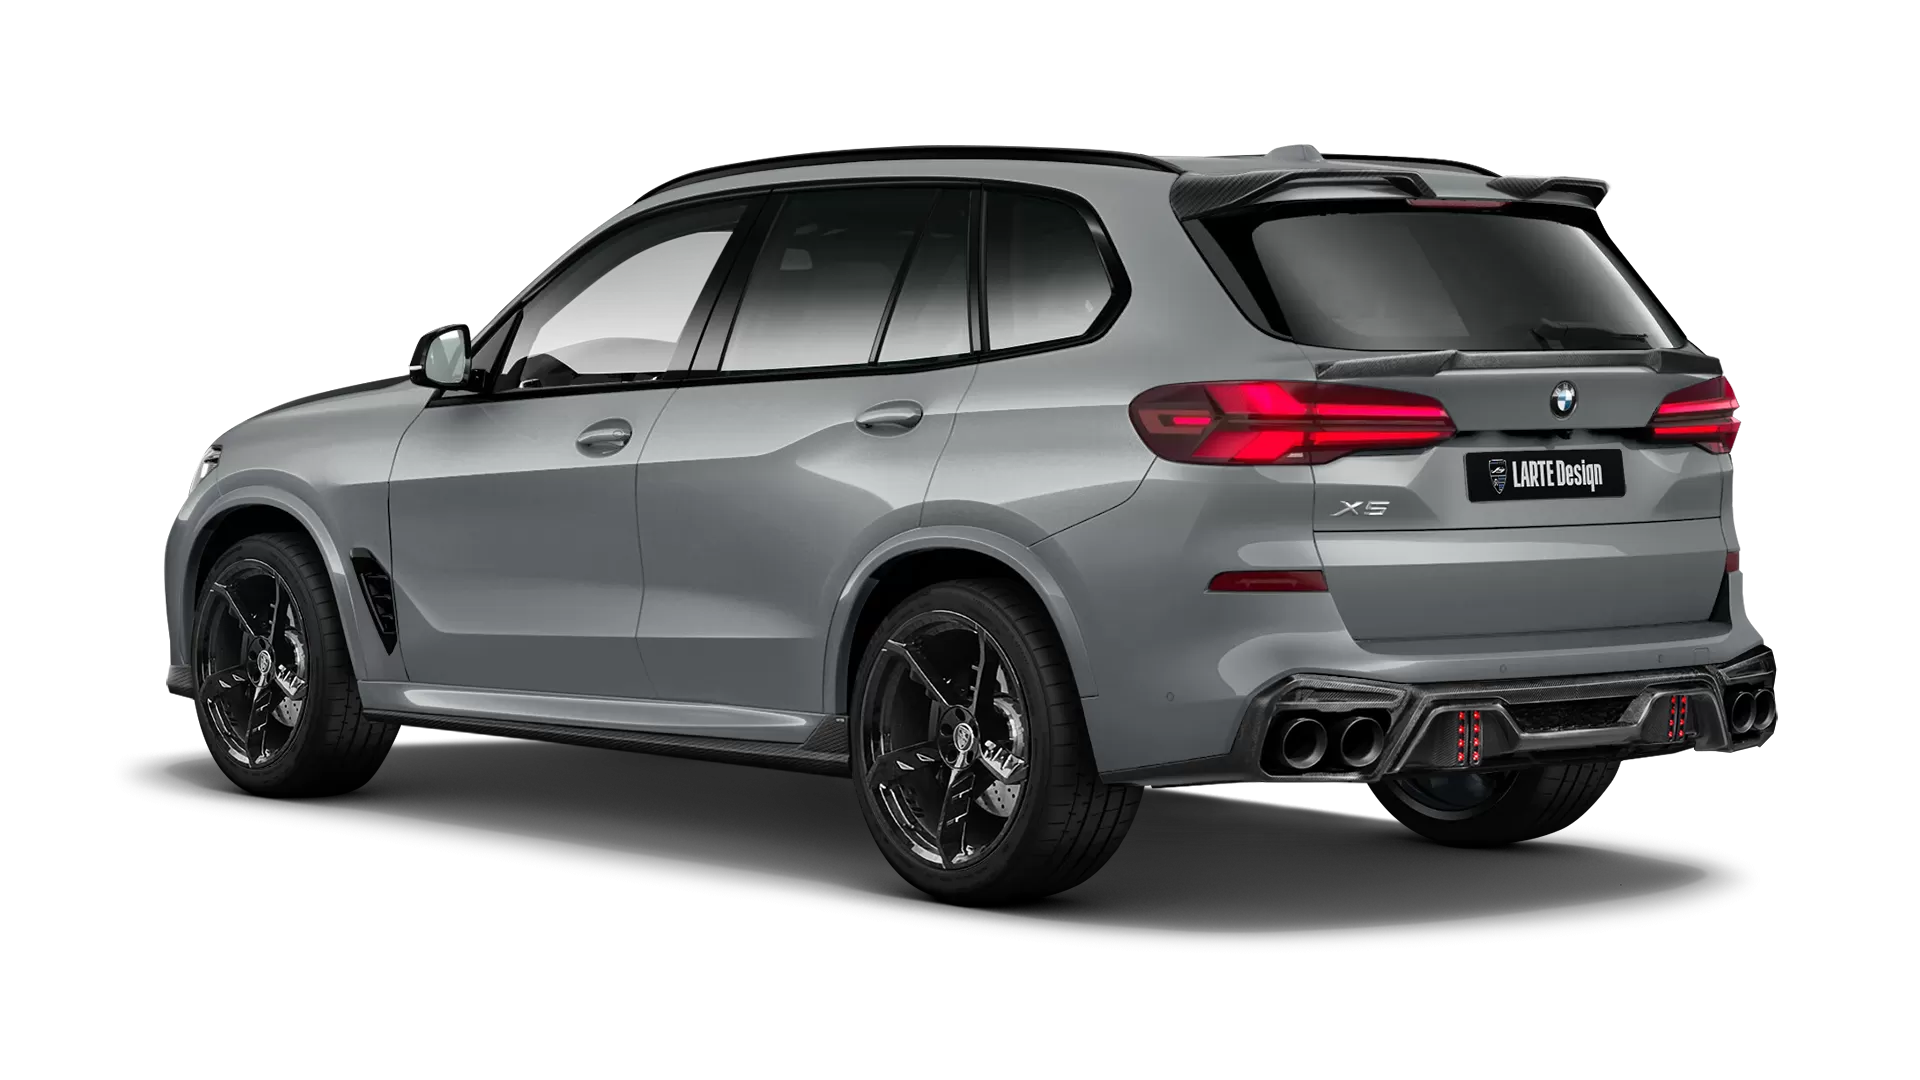 BMW X5 G05 LCI Facelift with carbon body kit: back view shown in Brooklyn Grey